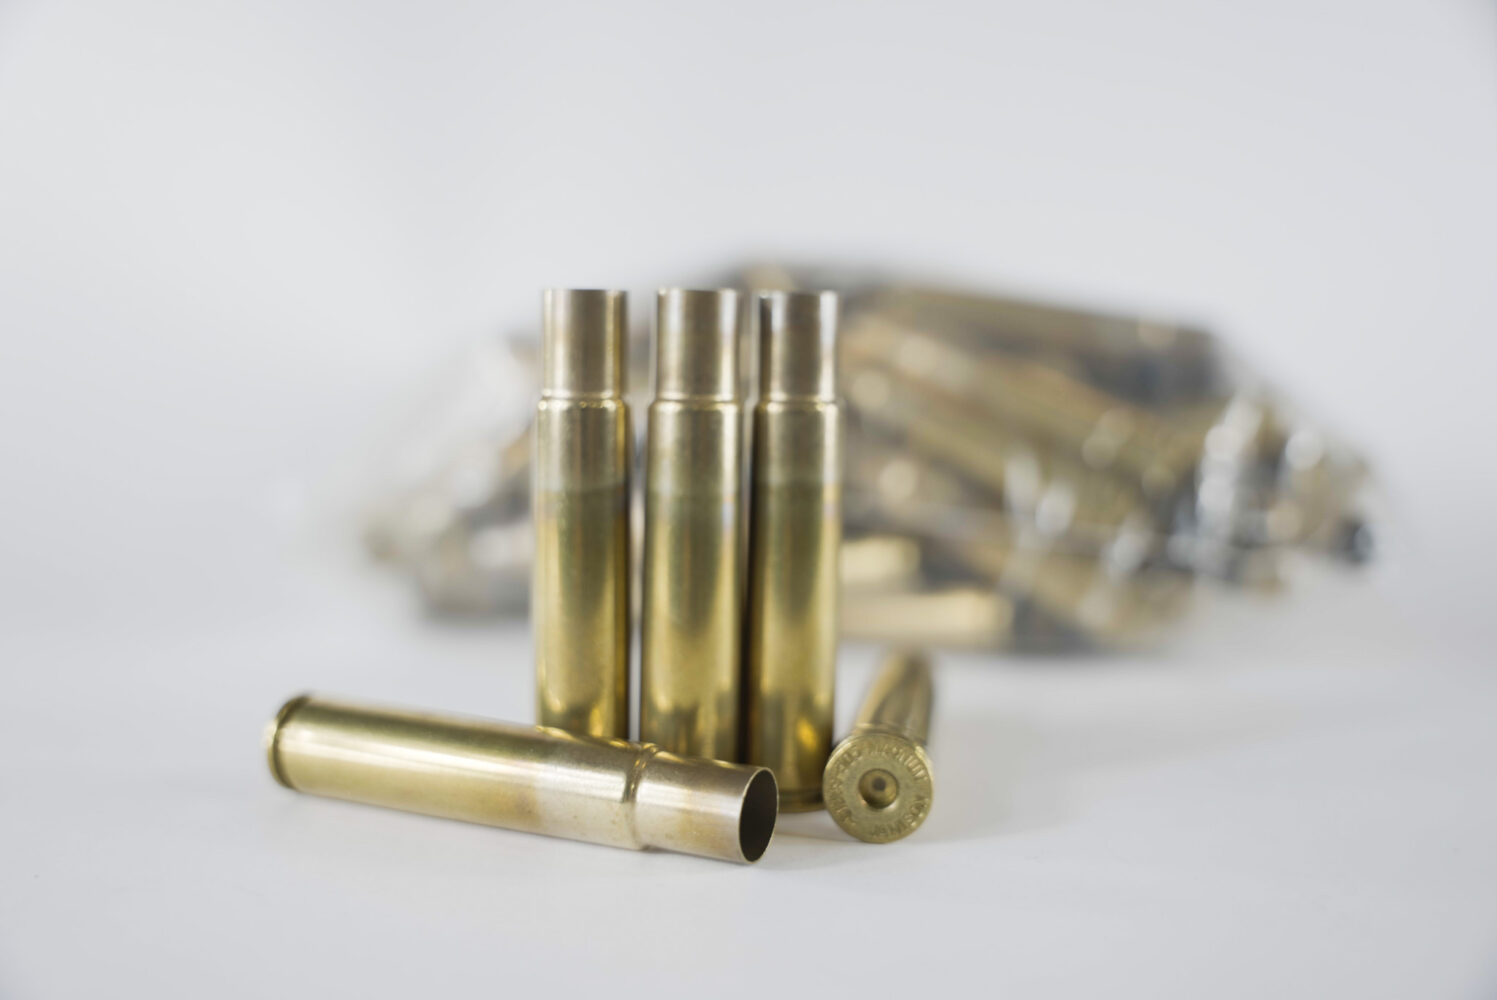 505 Gibbs Magnum Brass Cases 100 Per Package!